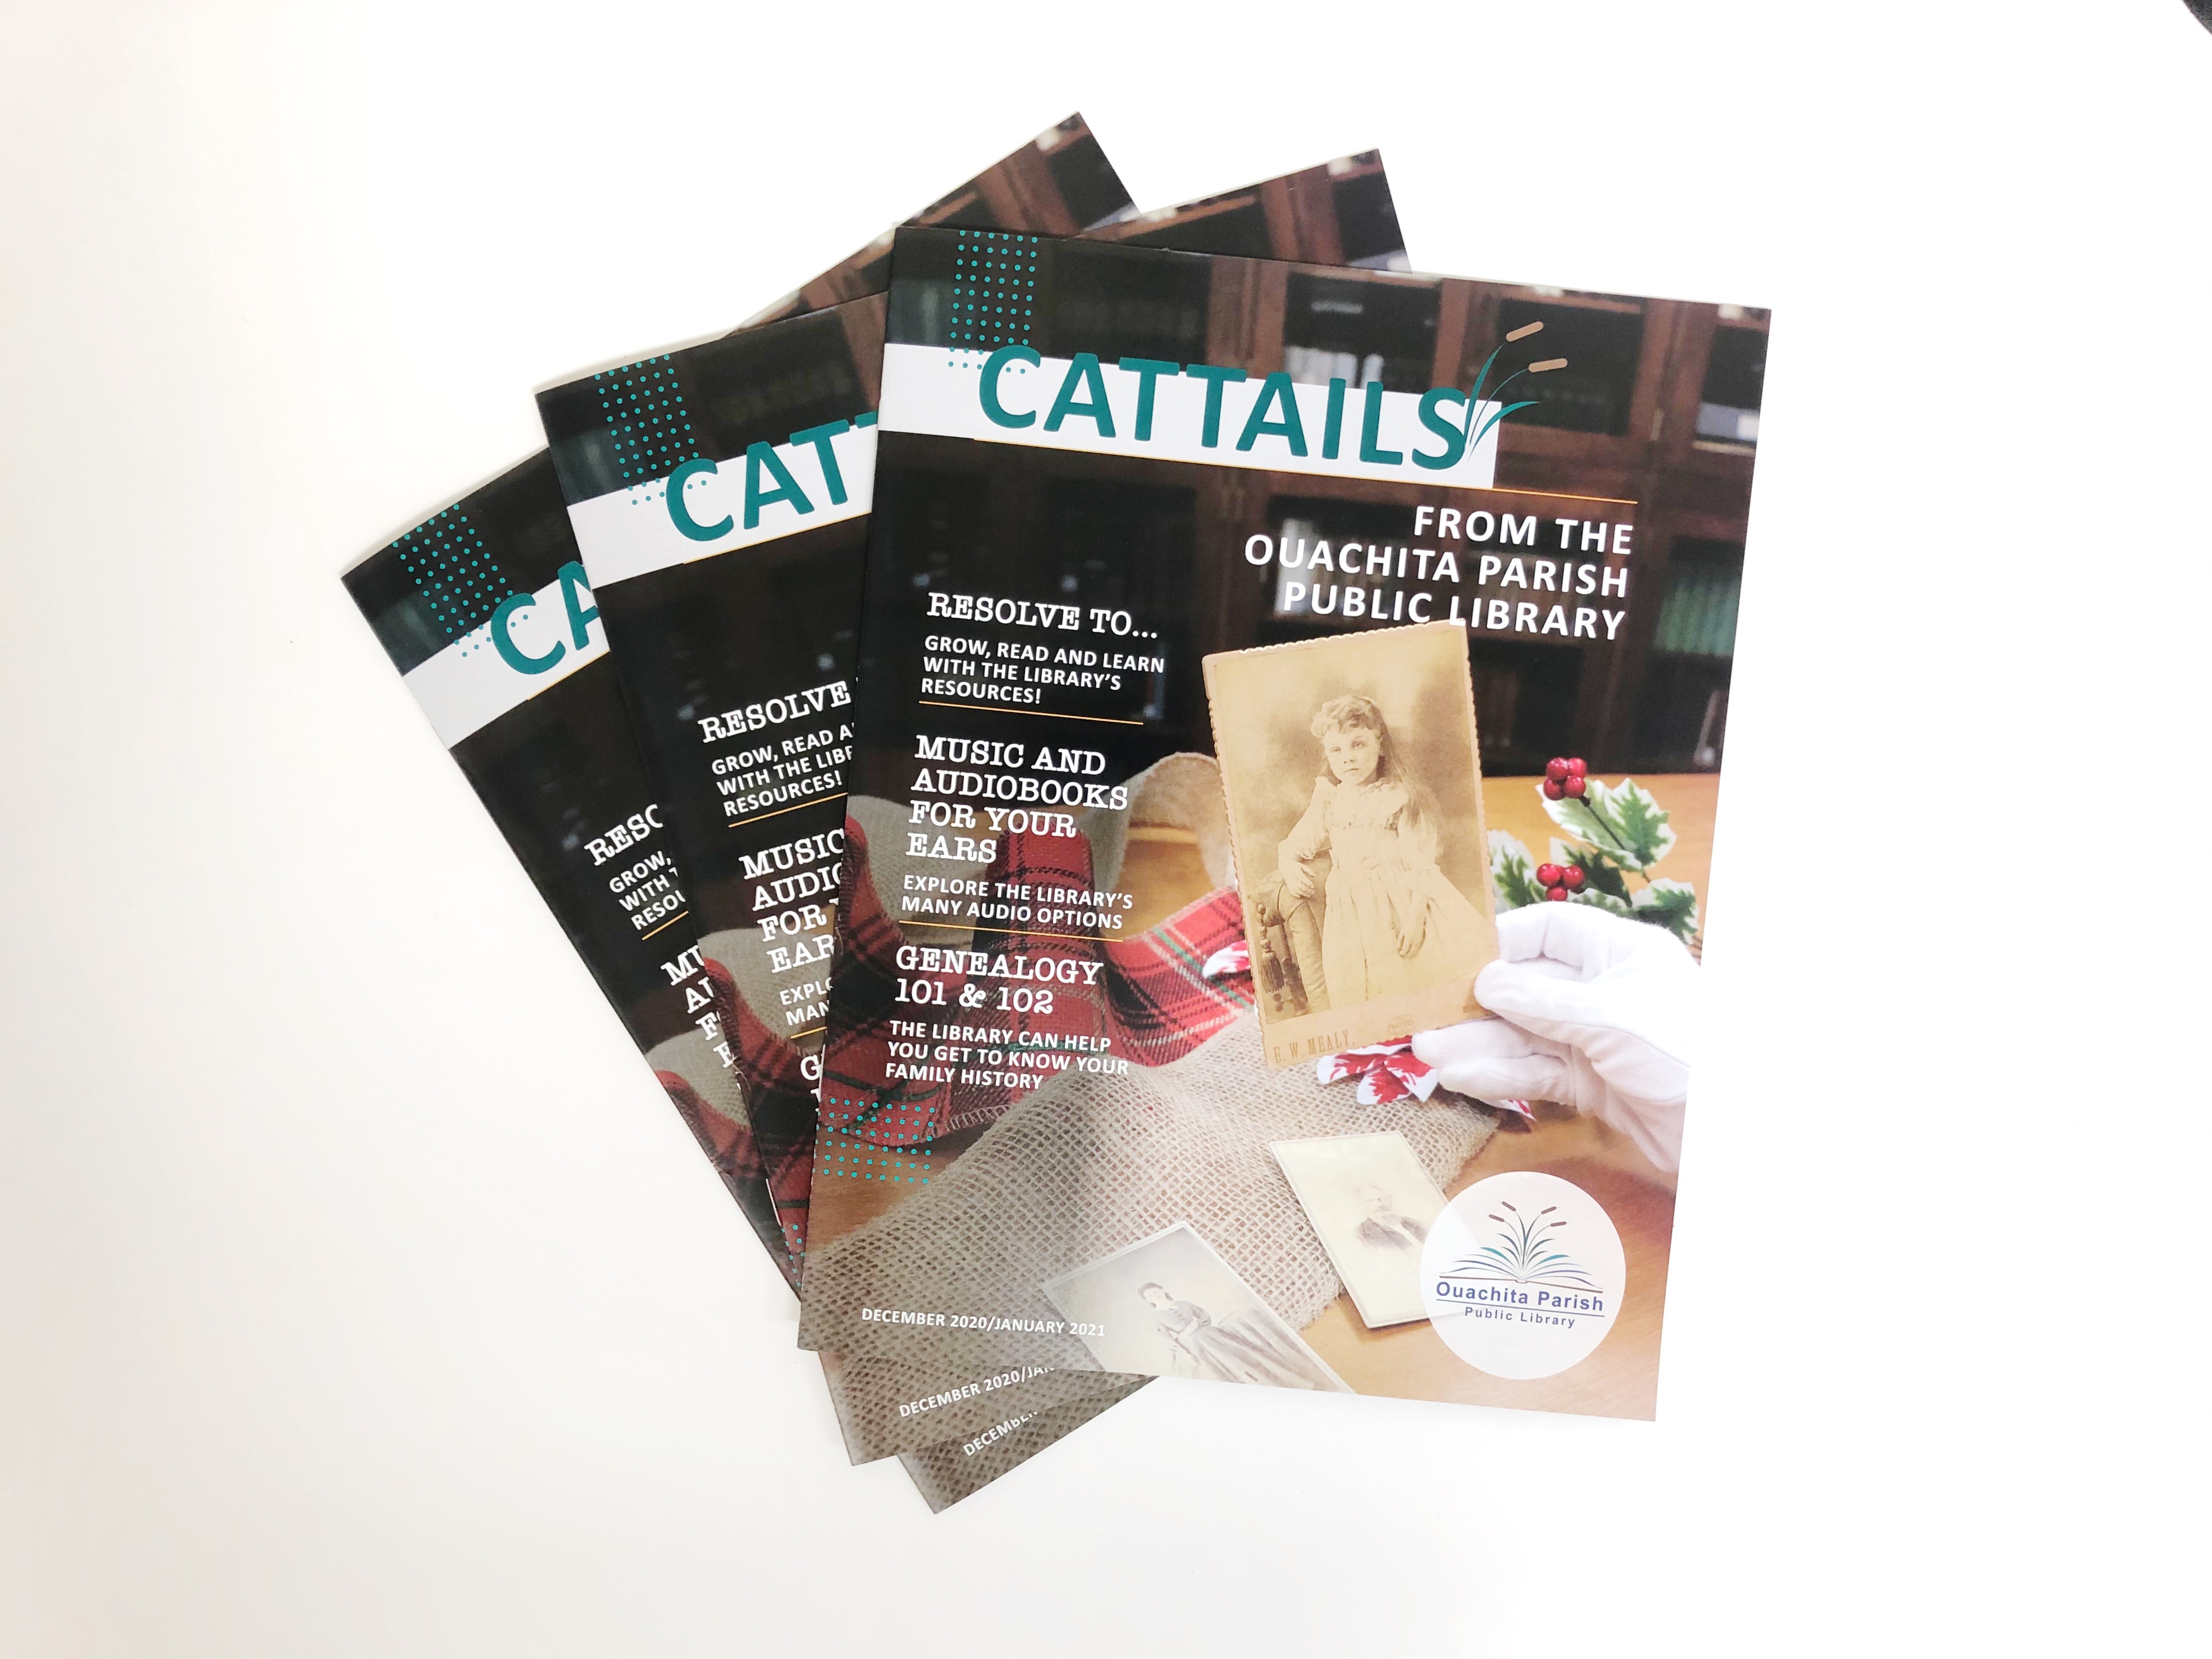 Three issues of the December/January Cattails lay on a white table